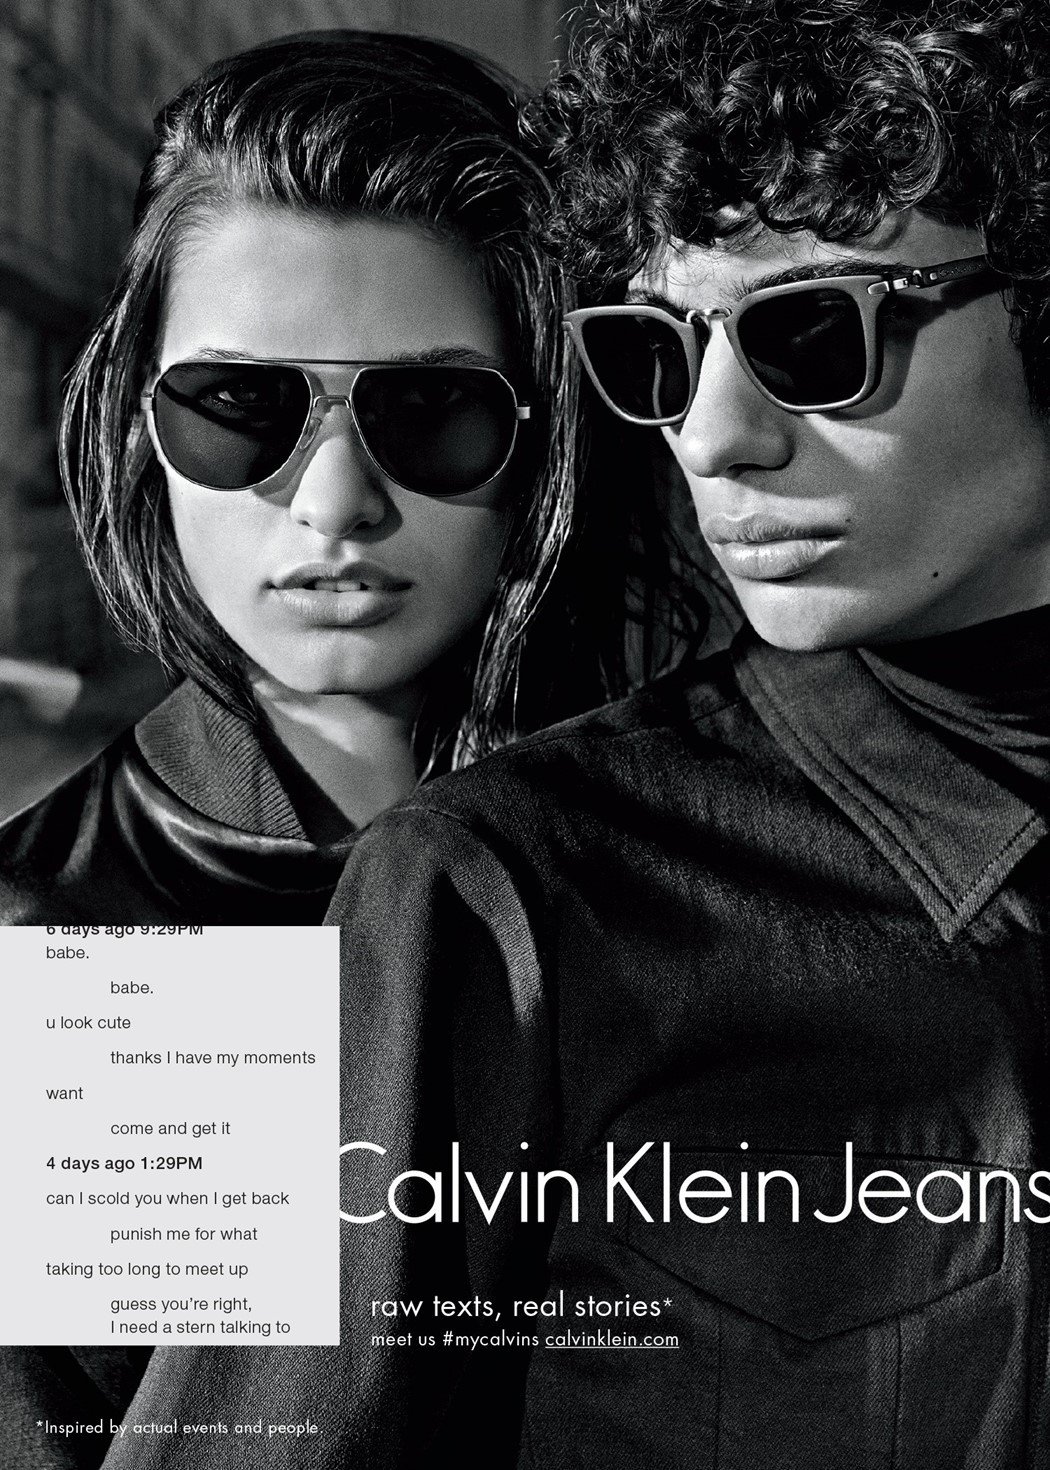 New Calvin Klein Jeans ad campaign inspired by sexting